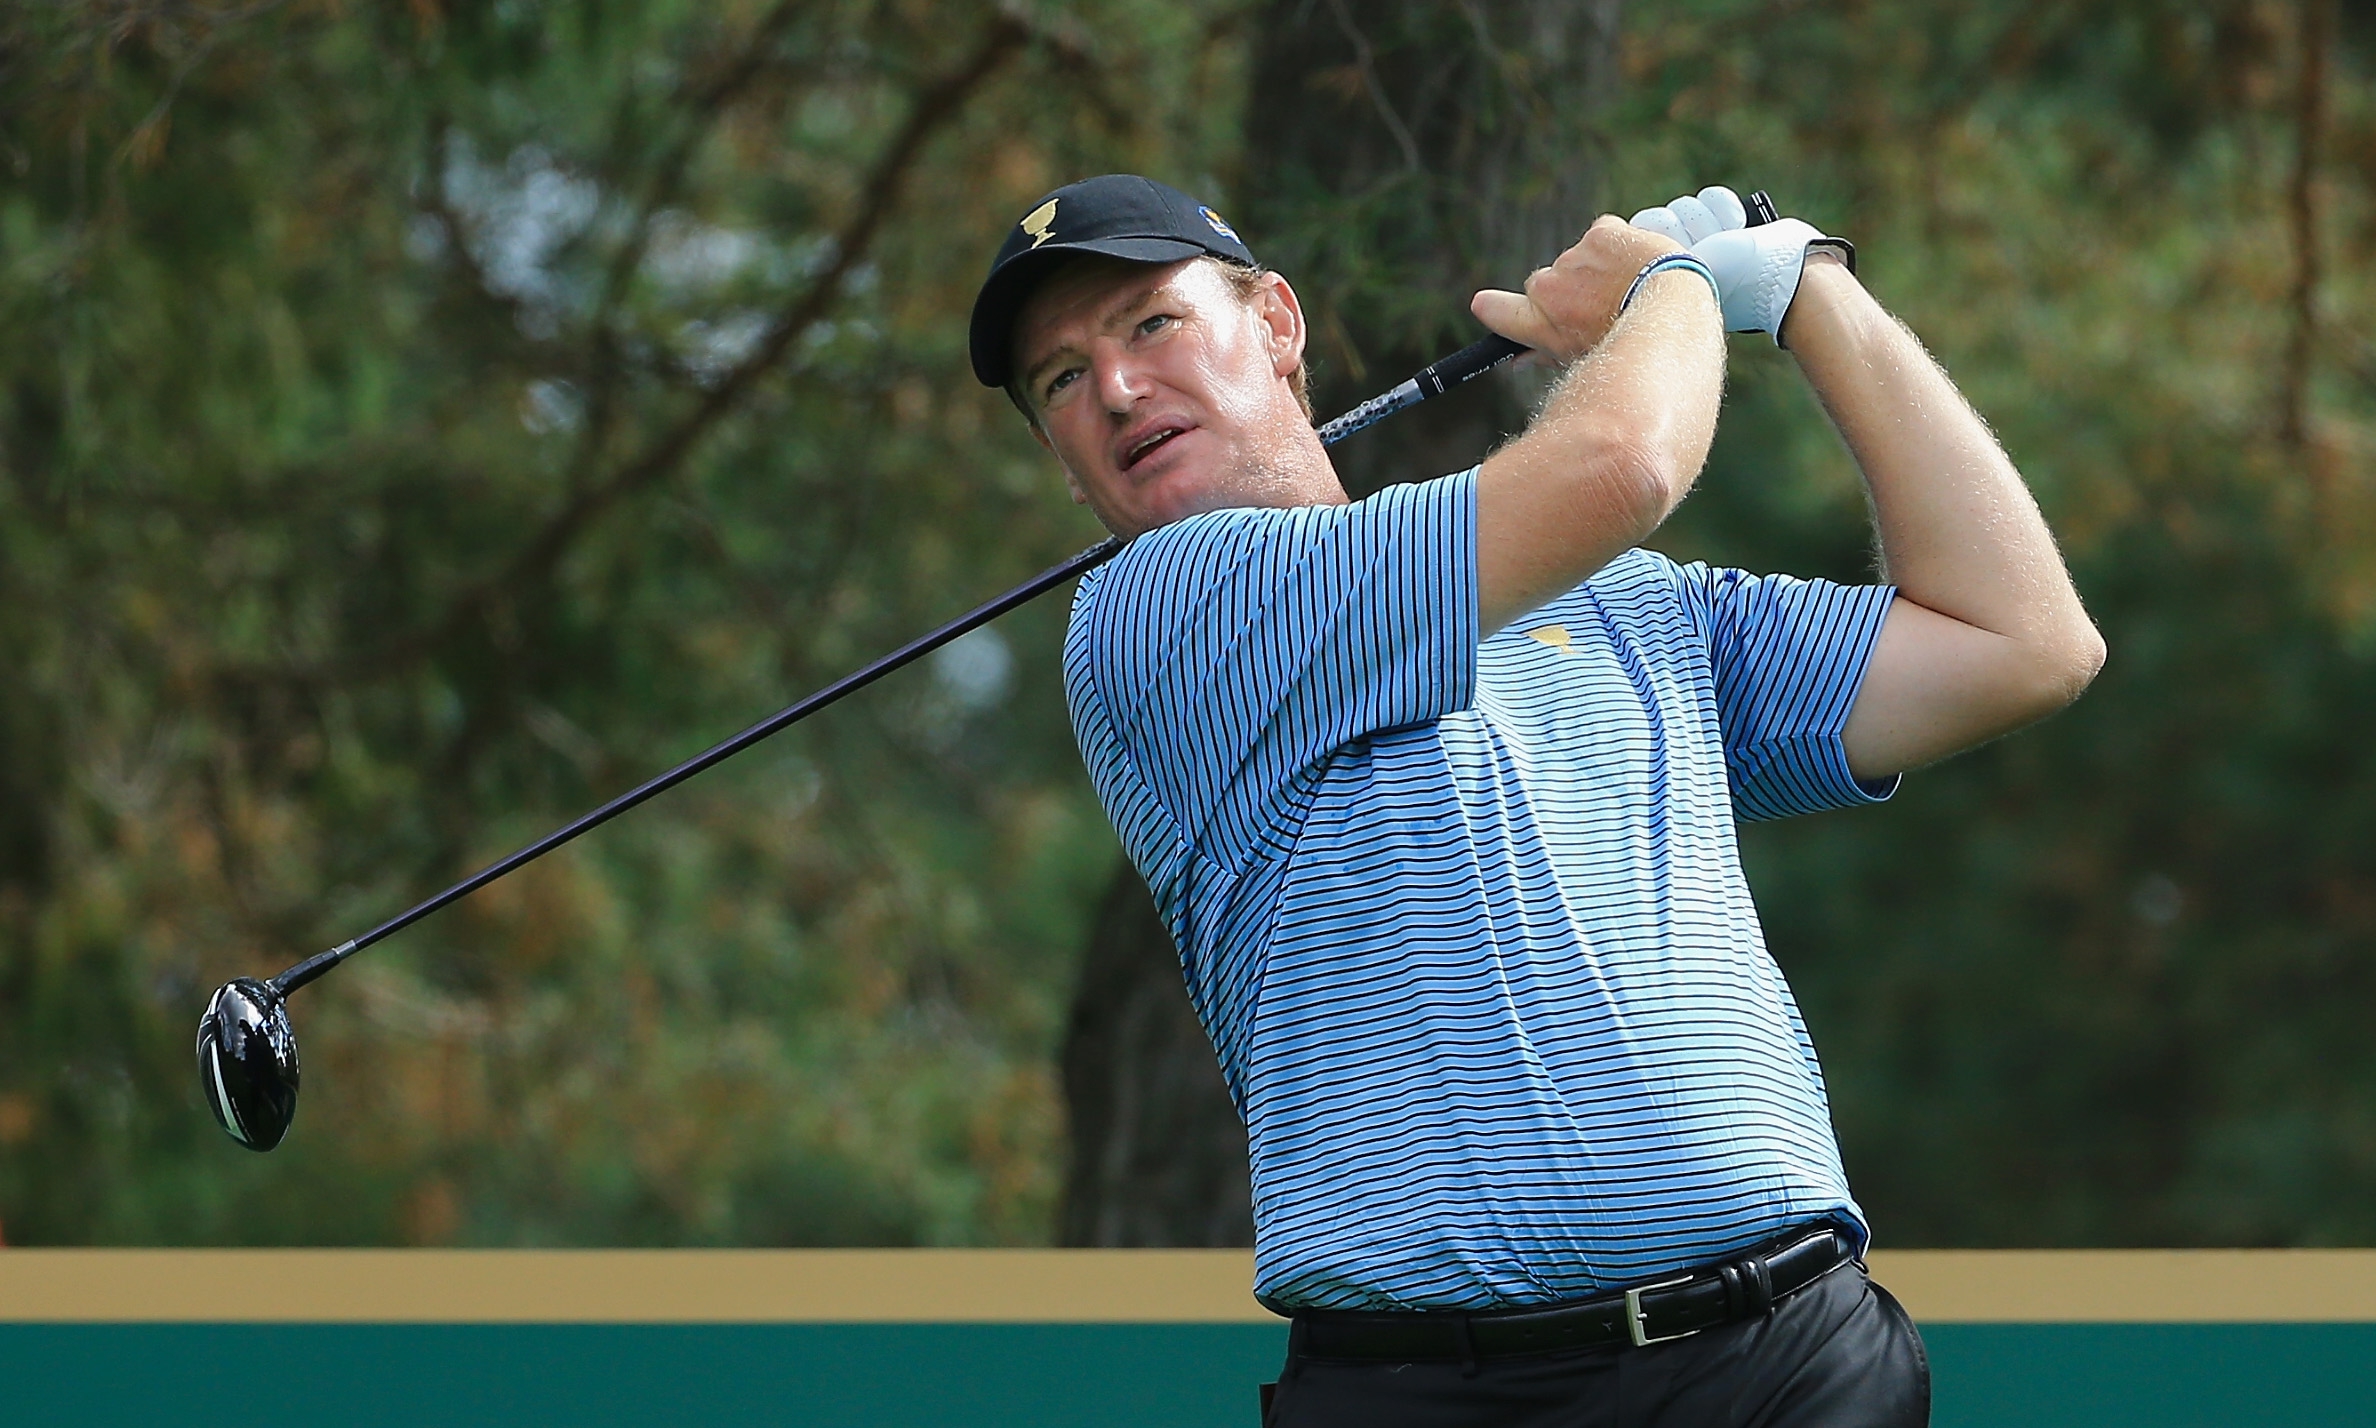 Ernie Els says he enjoys helping young South African players. Photo: AFP